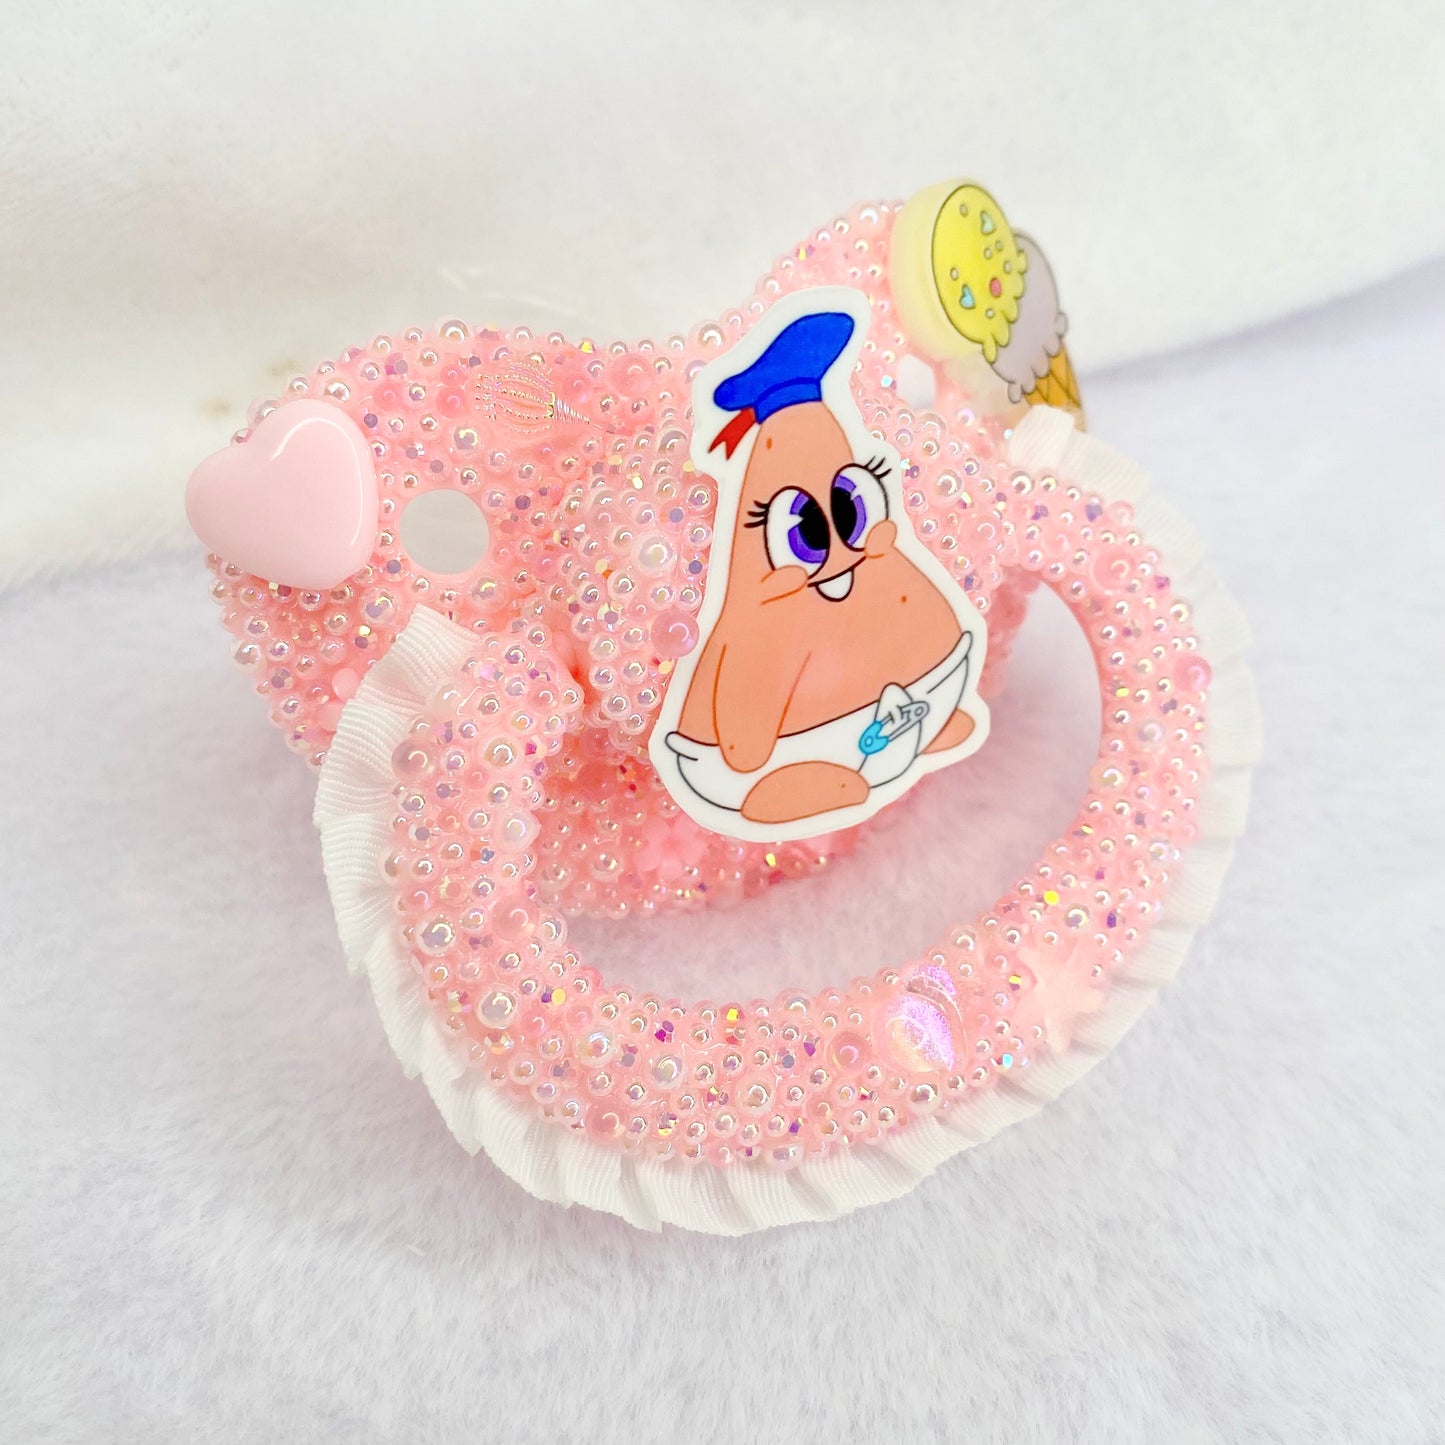 Baby Patrick - Adult pacifier